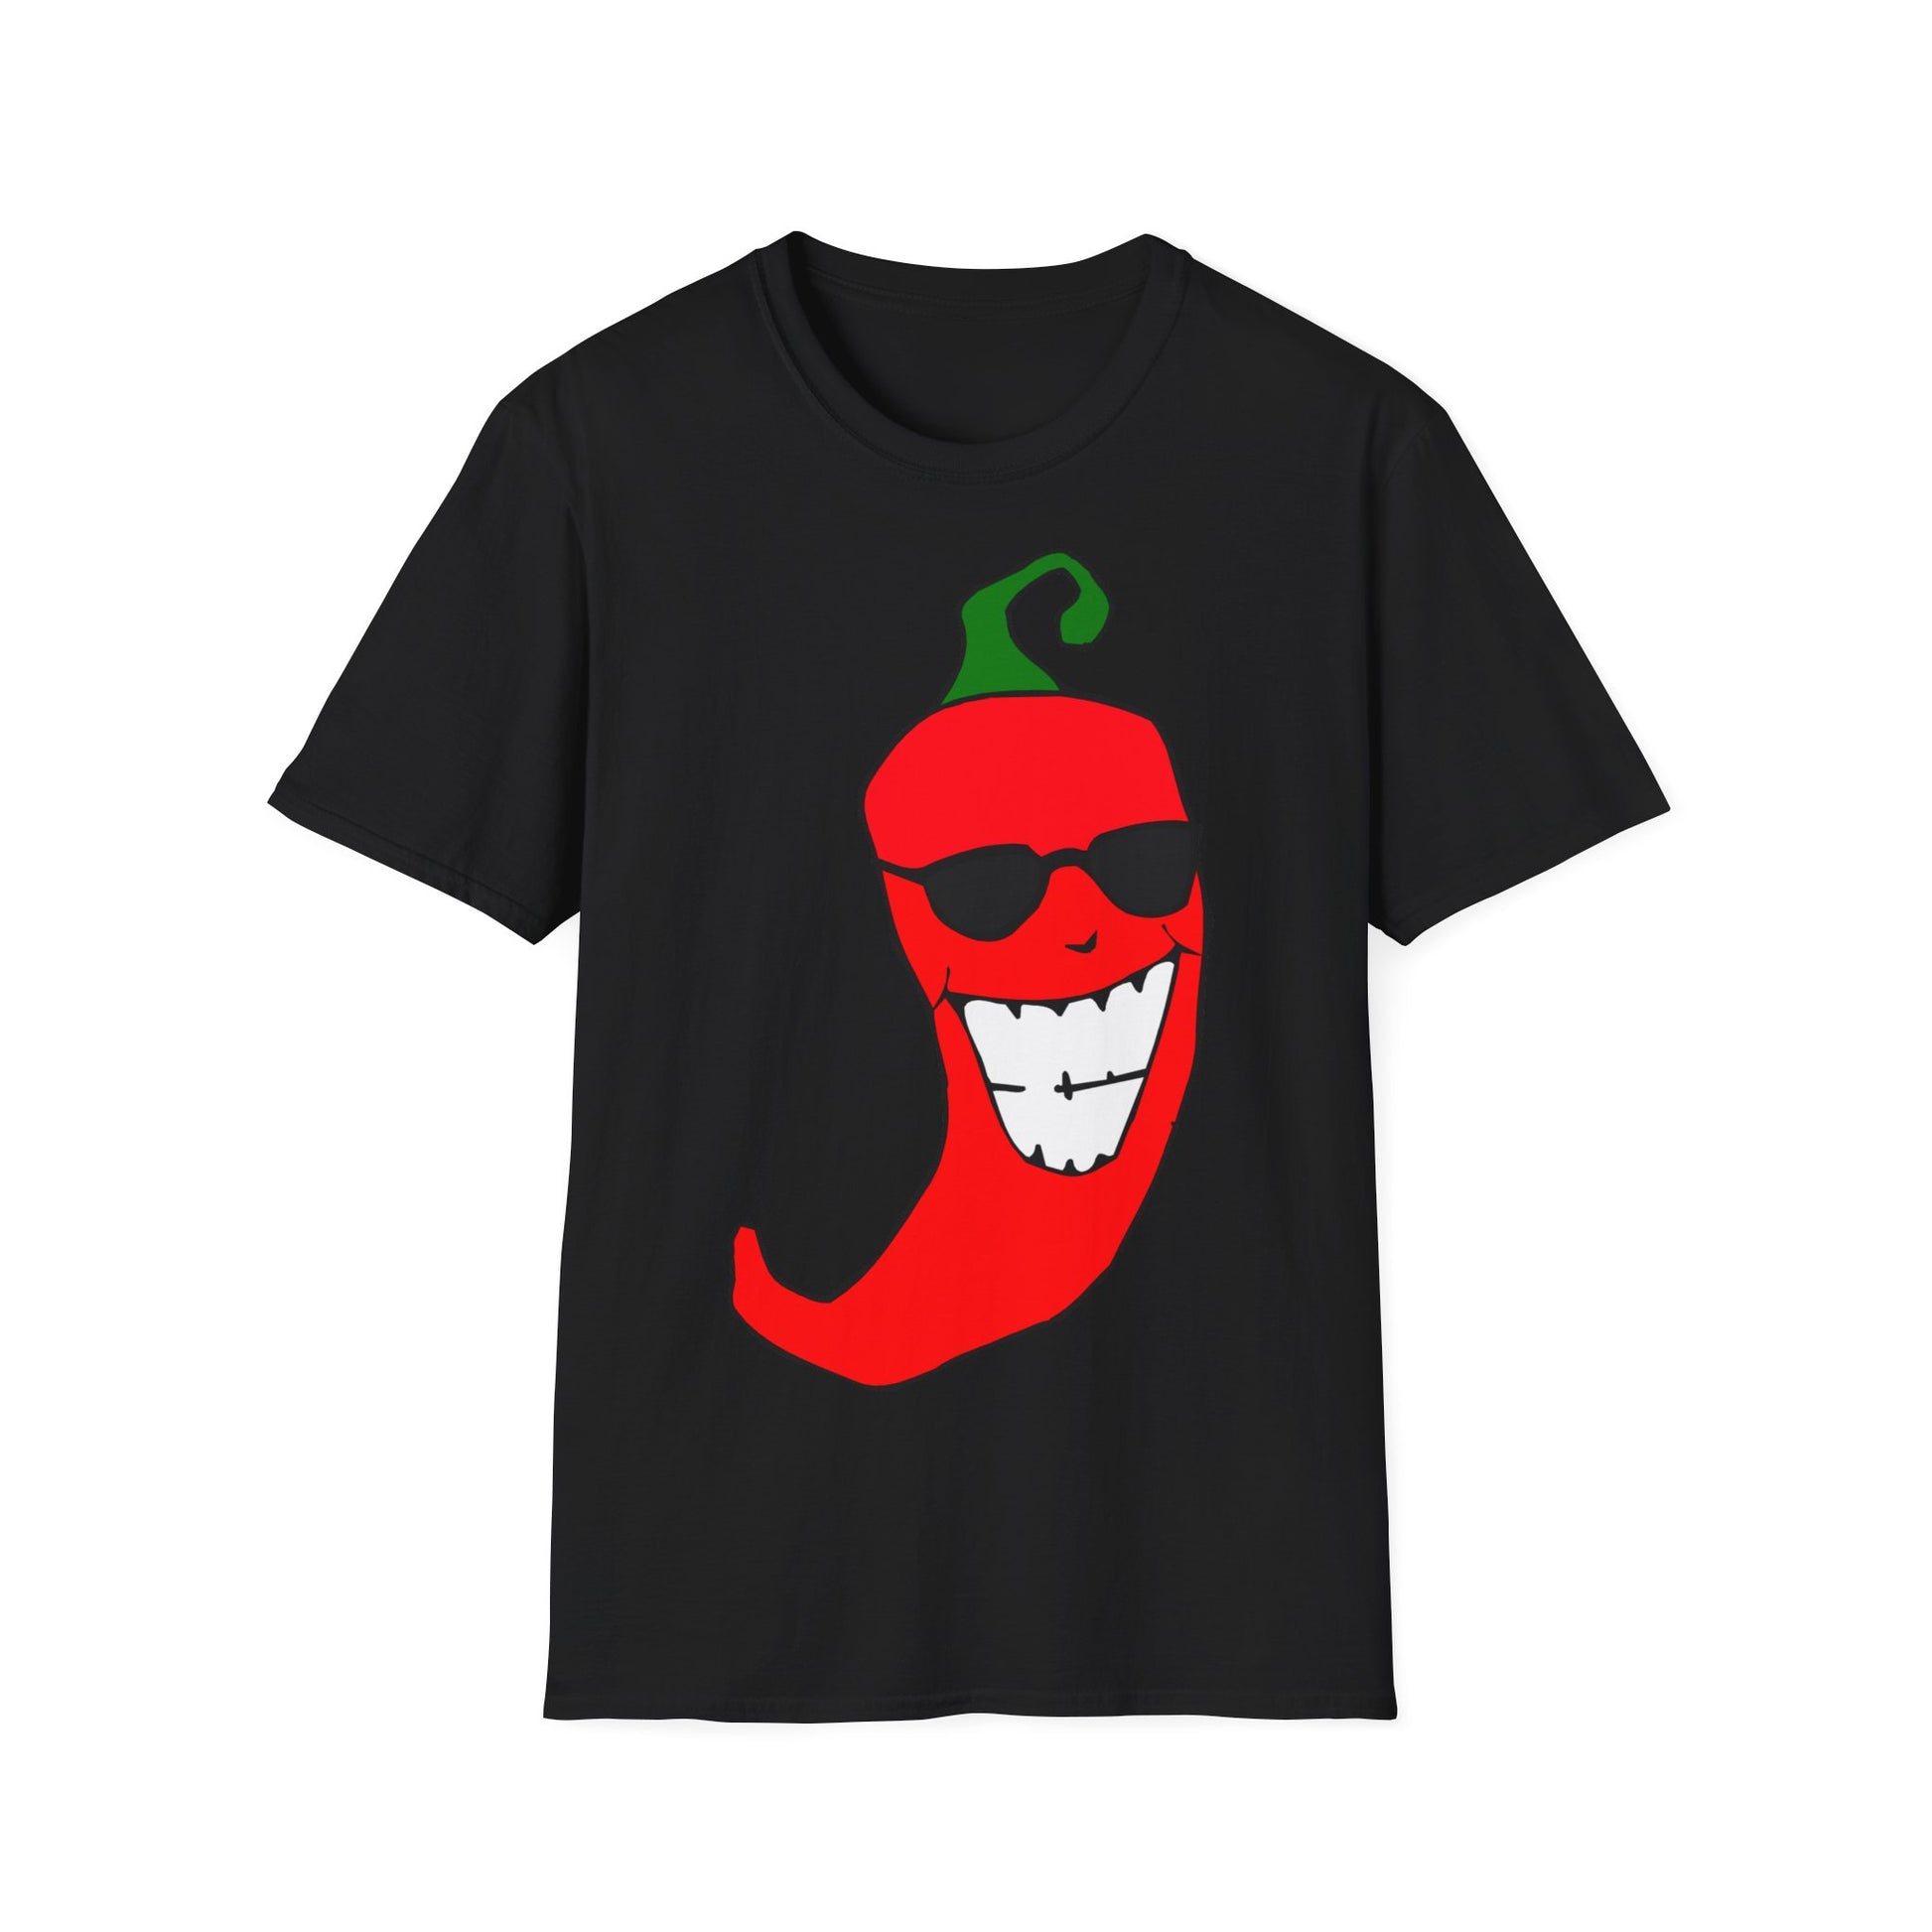 A black t-shirt with a design of a cartoon red chili pepper wearing sunglasses.